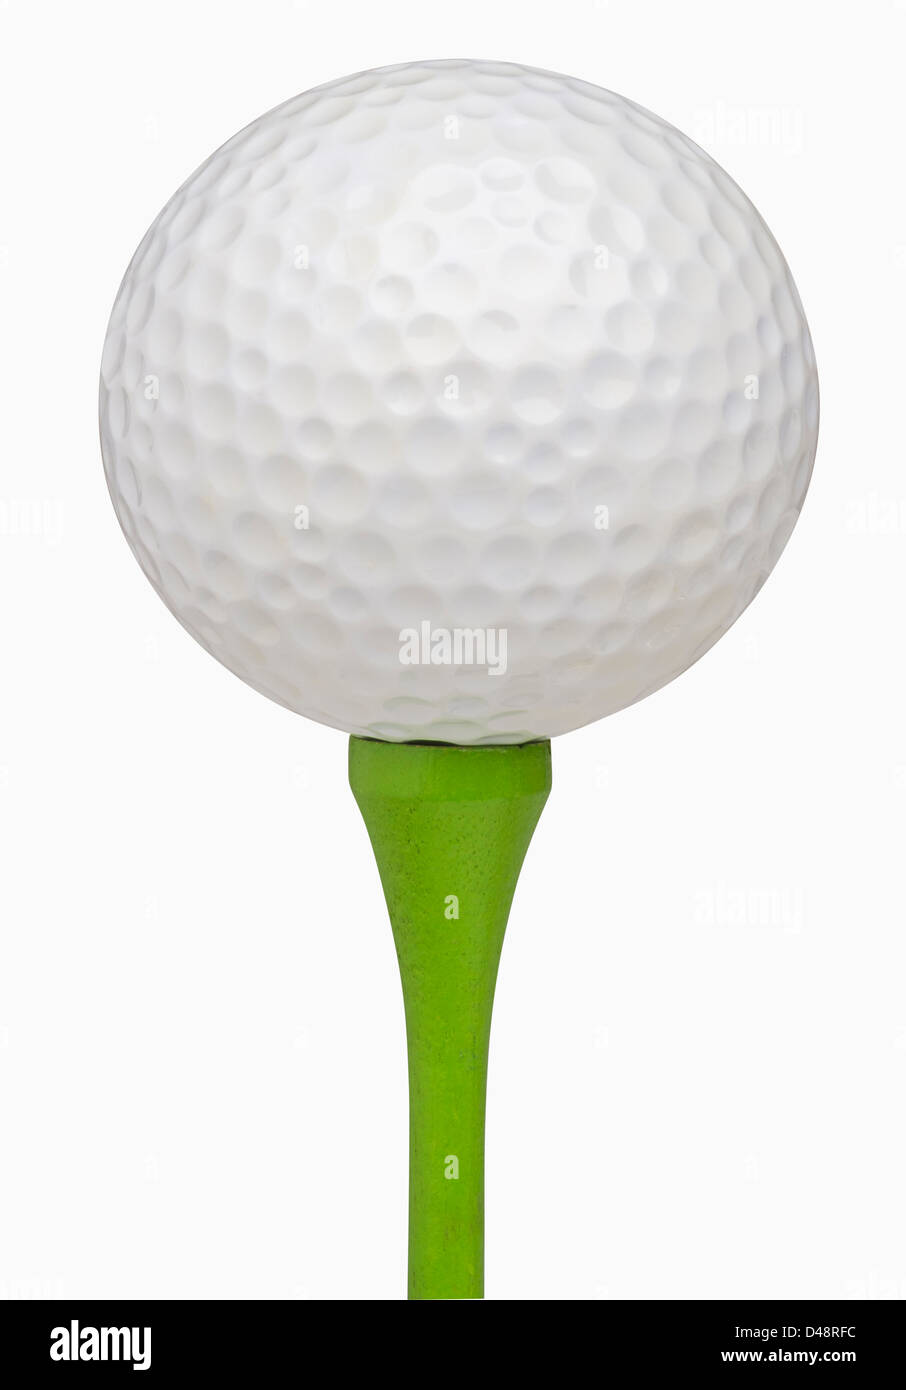 Golf ball on tee, isolated on white, includes clipping path Stock Photo